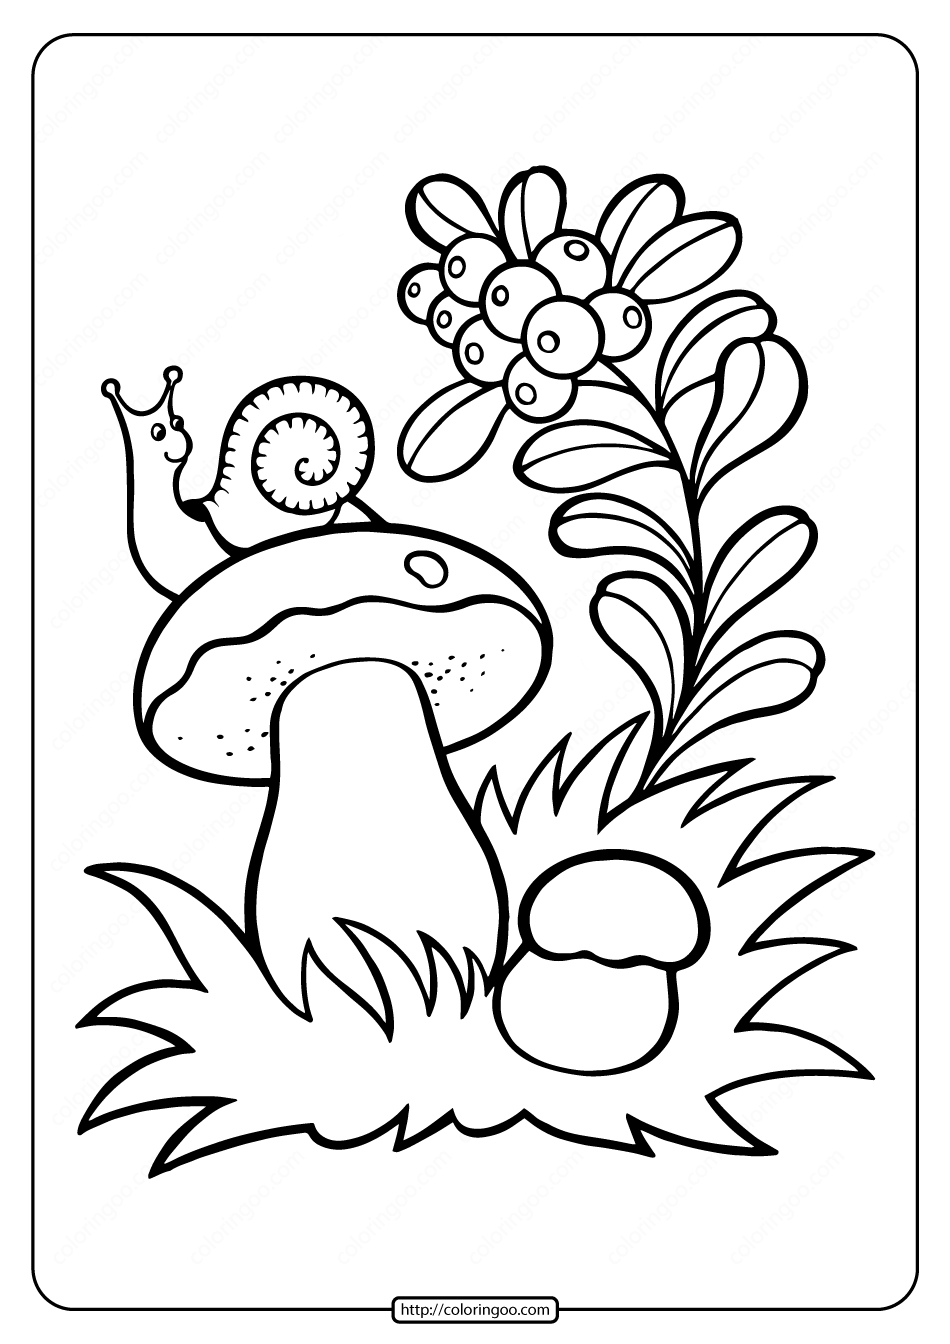 snail on the mushroom coloring pages